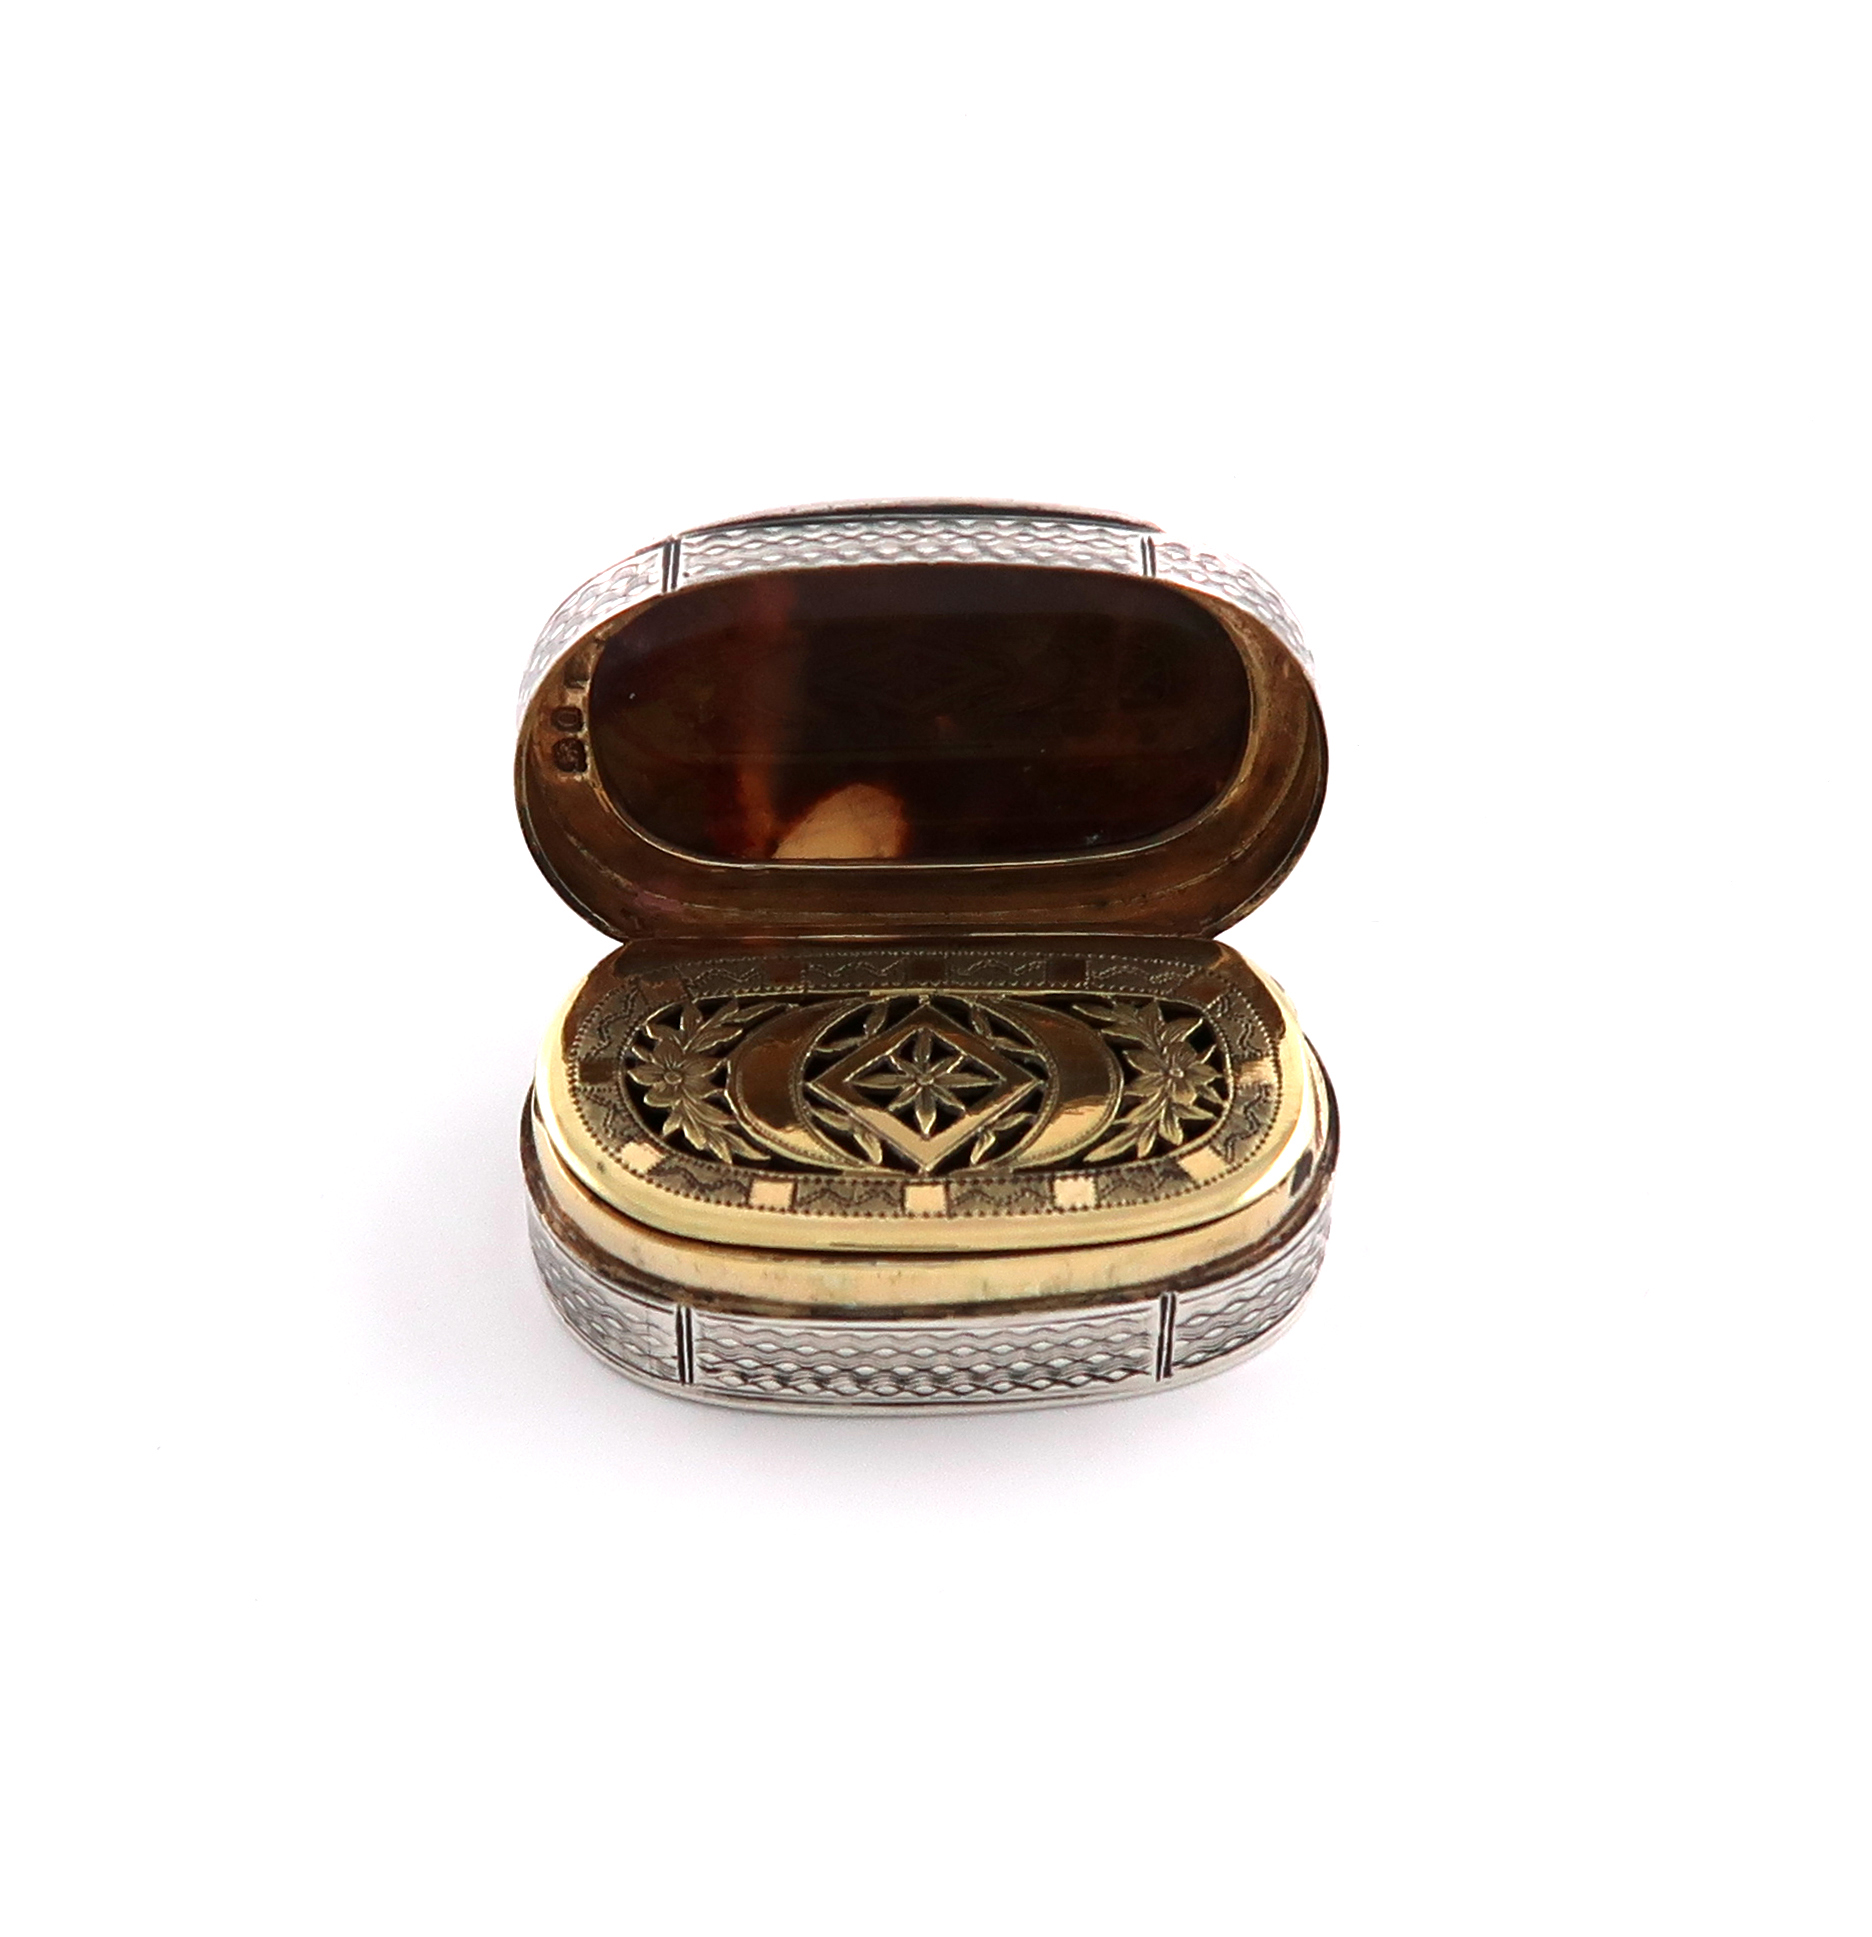 A George III silver-mounted agate vinaigrette, by Thomas Phipps, Edward Robinson & James Phipps, - Image 2 of 2